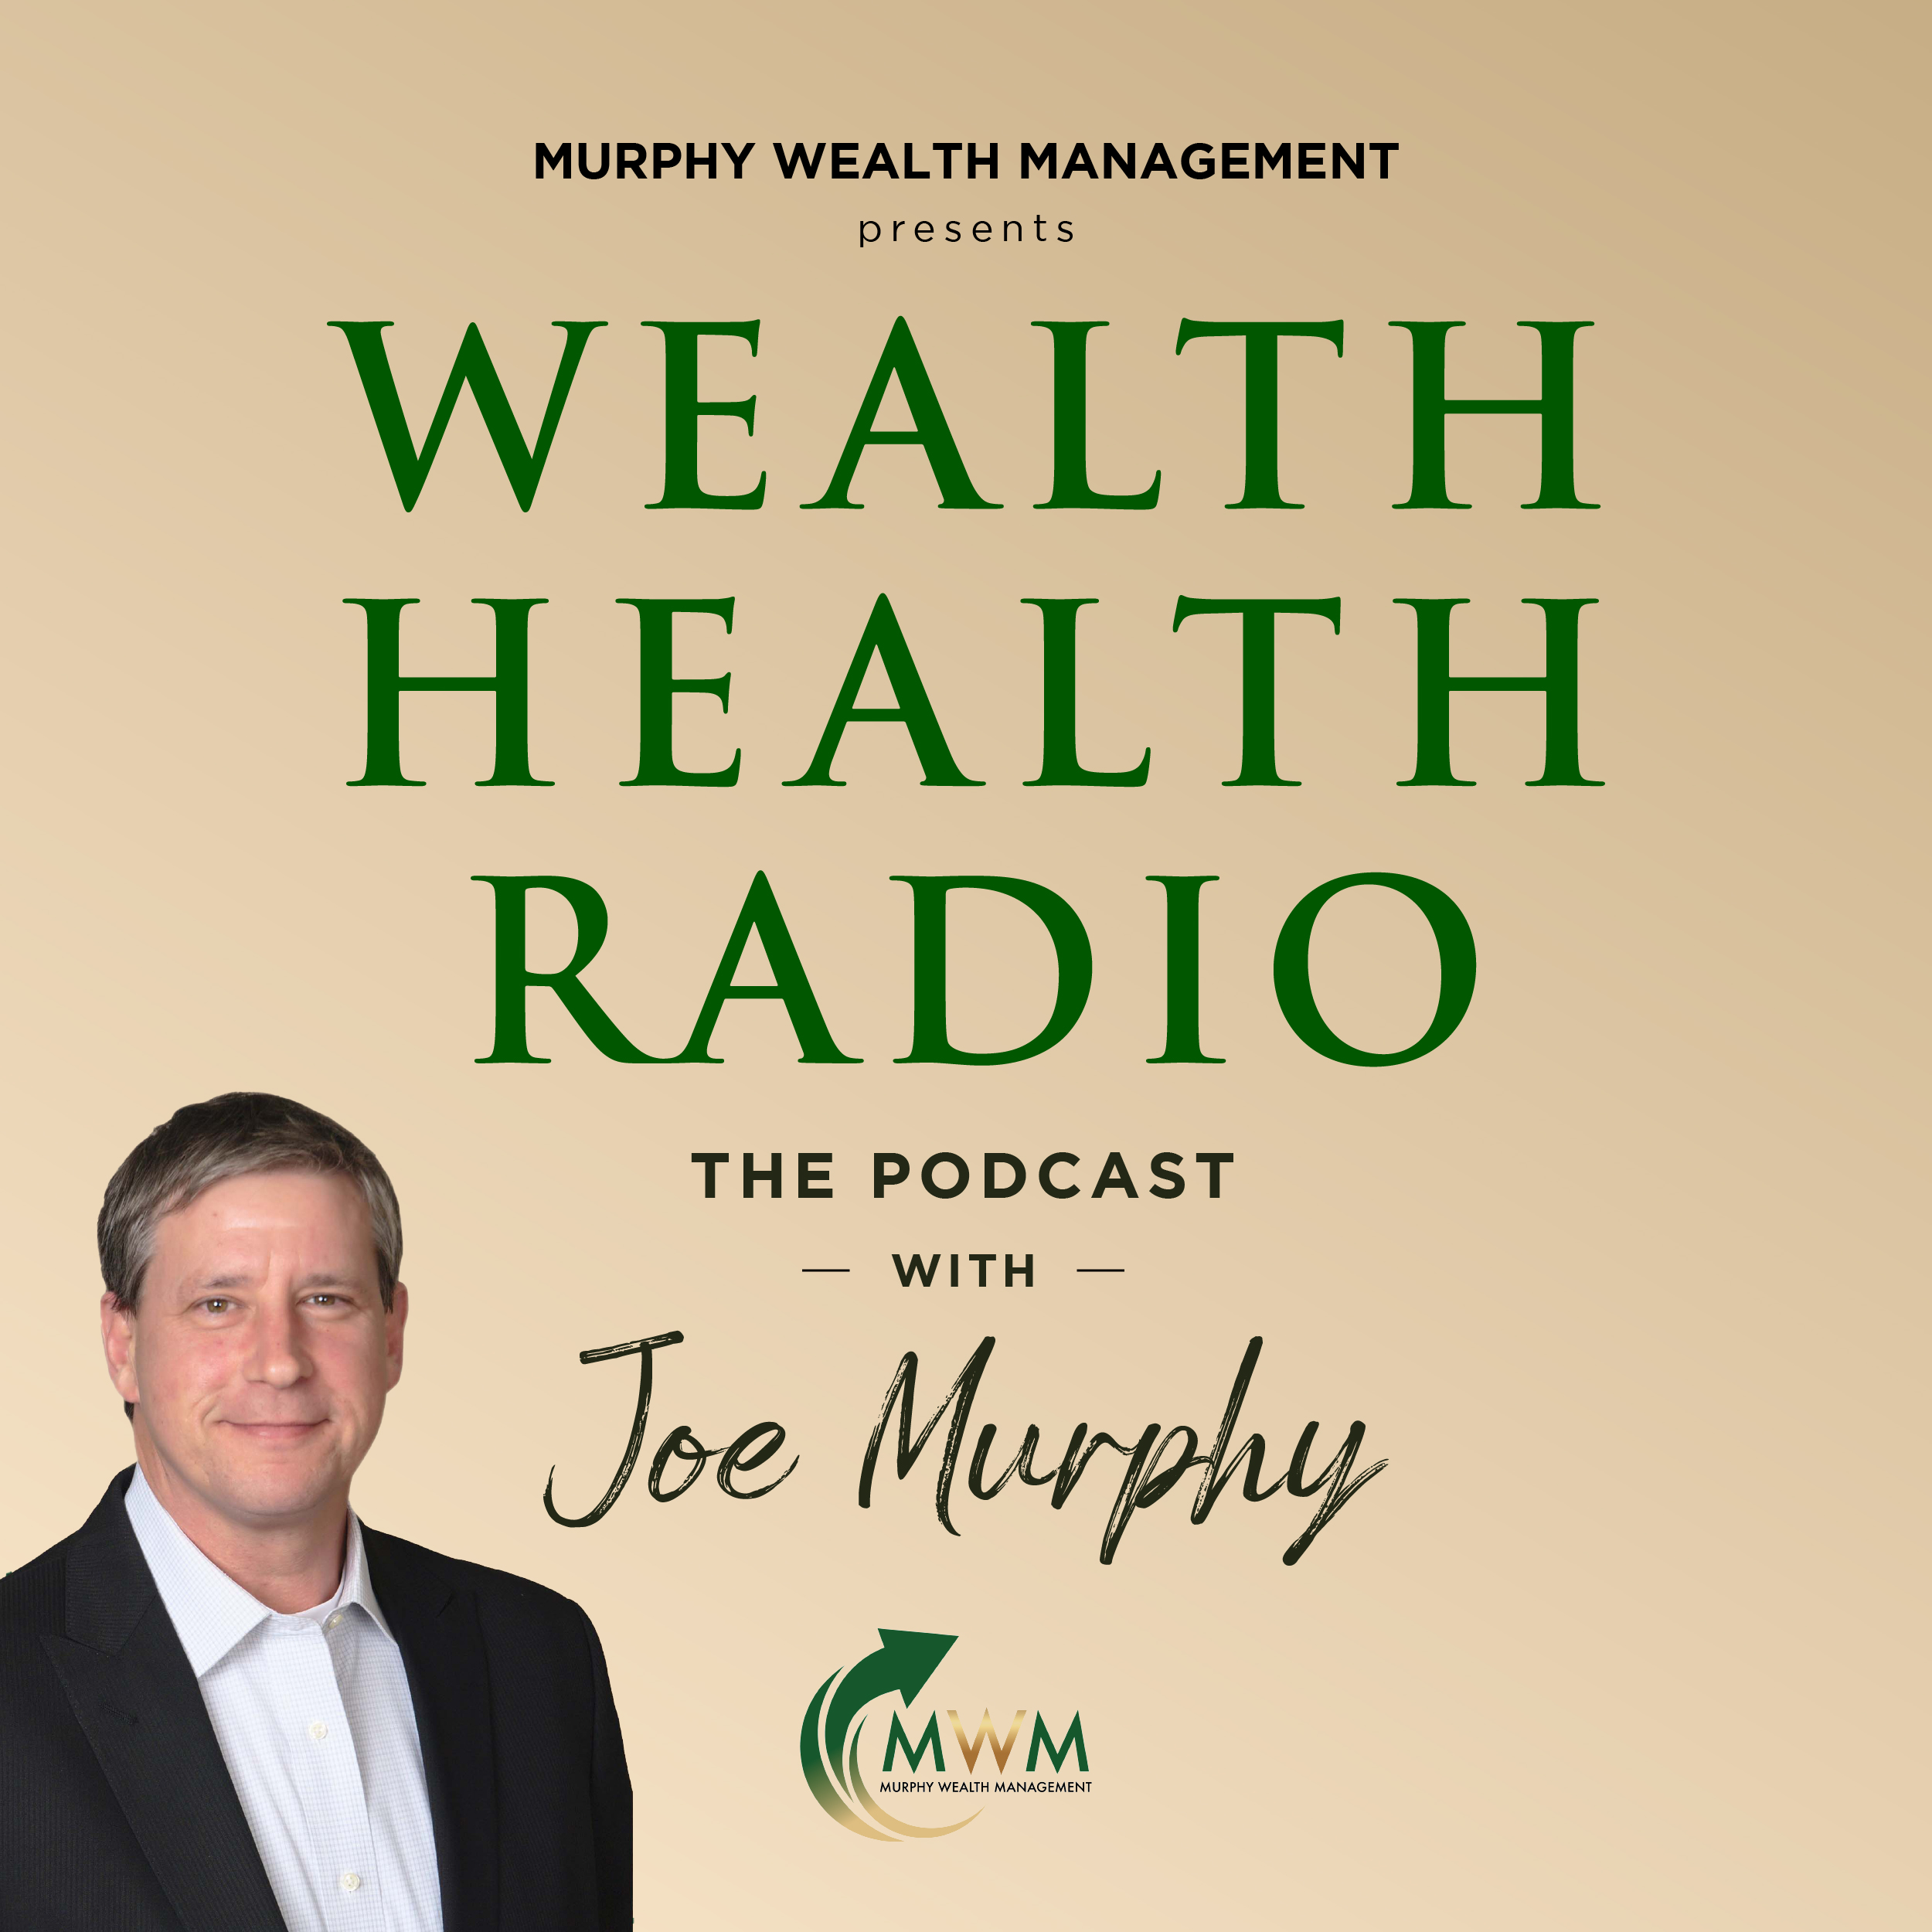 Wealth Health Radio On today’s show, we are covering some iconic cinematic examples of what to do, and more importantly, what NOT to do when it comes to your finances.